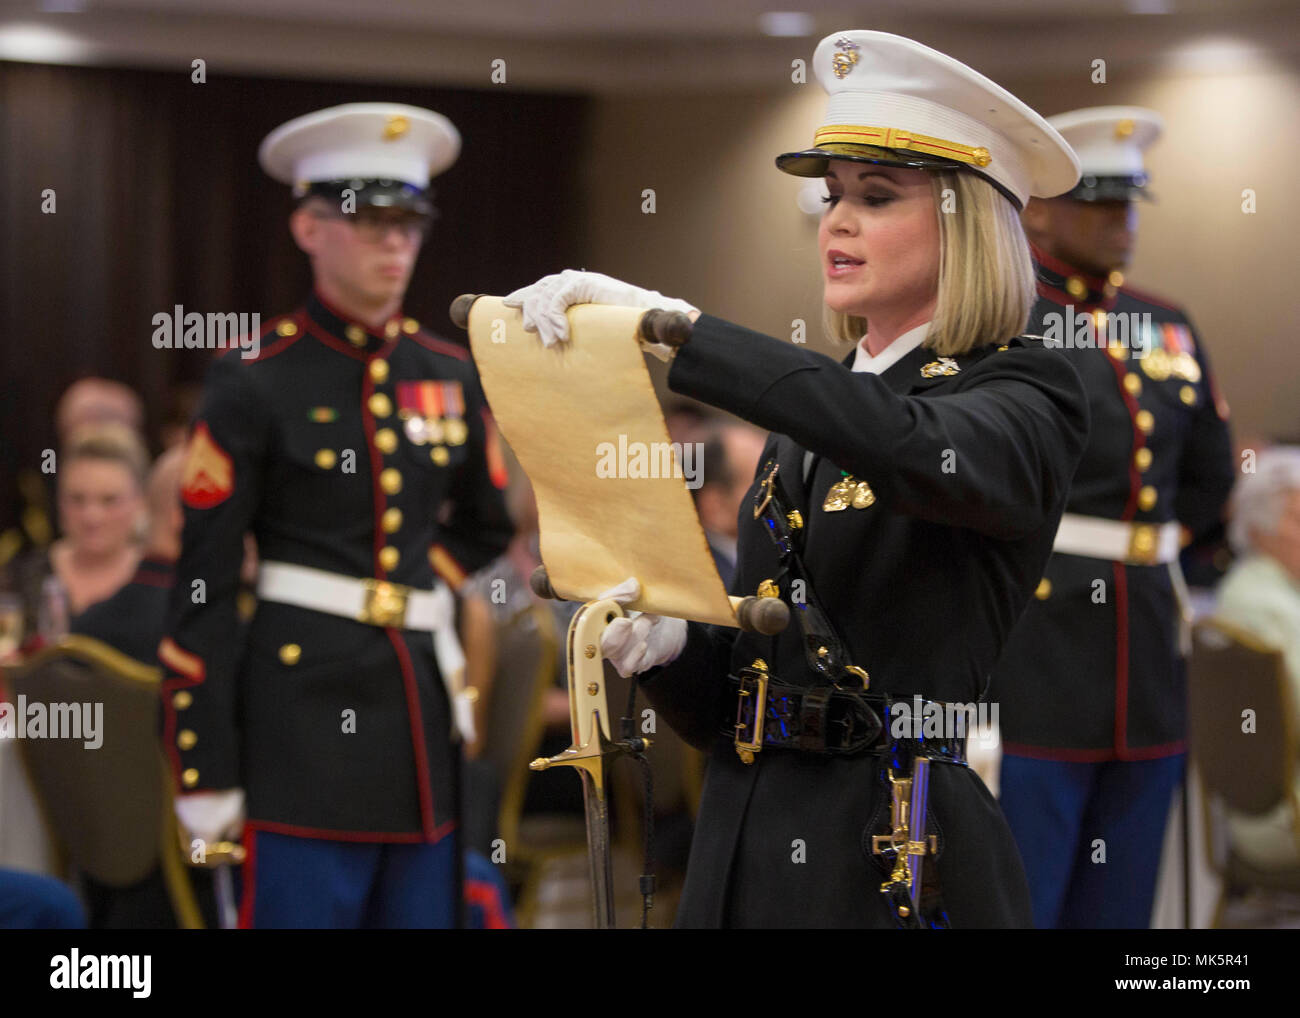 captain christina m shulman reads the birthday message from the 13th commandant of the marine corps maj gen john a lejeune during 6th marine corps districts 6mcd 242nd marine corps ball at the omni hotel hilton head south carolina nov 3 2017 the marines sailors and their families celebrated the marine corps birthday ball to increase morale and foster camaraderie throughout the district the district headquarters supports the efforts of recruiting within the southeastern united states shulman is the adjutant for 6mcd us marine corps photo by lance cpl jack a e rigsby MK5R41